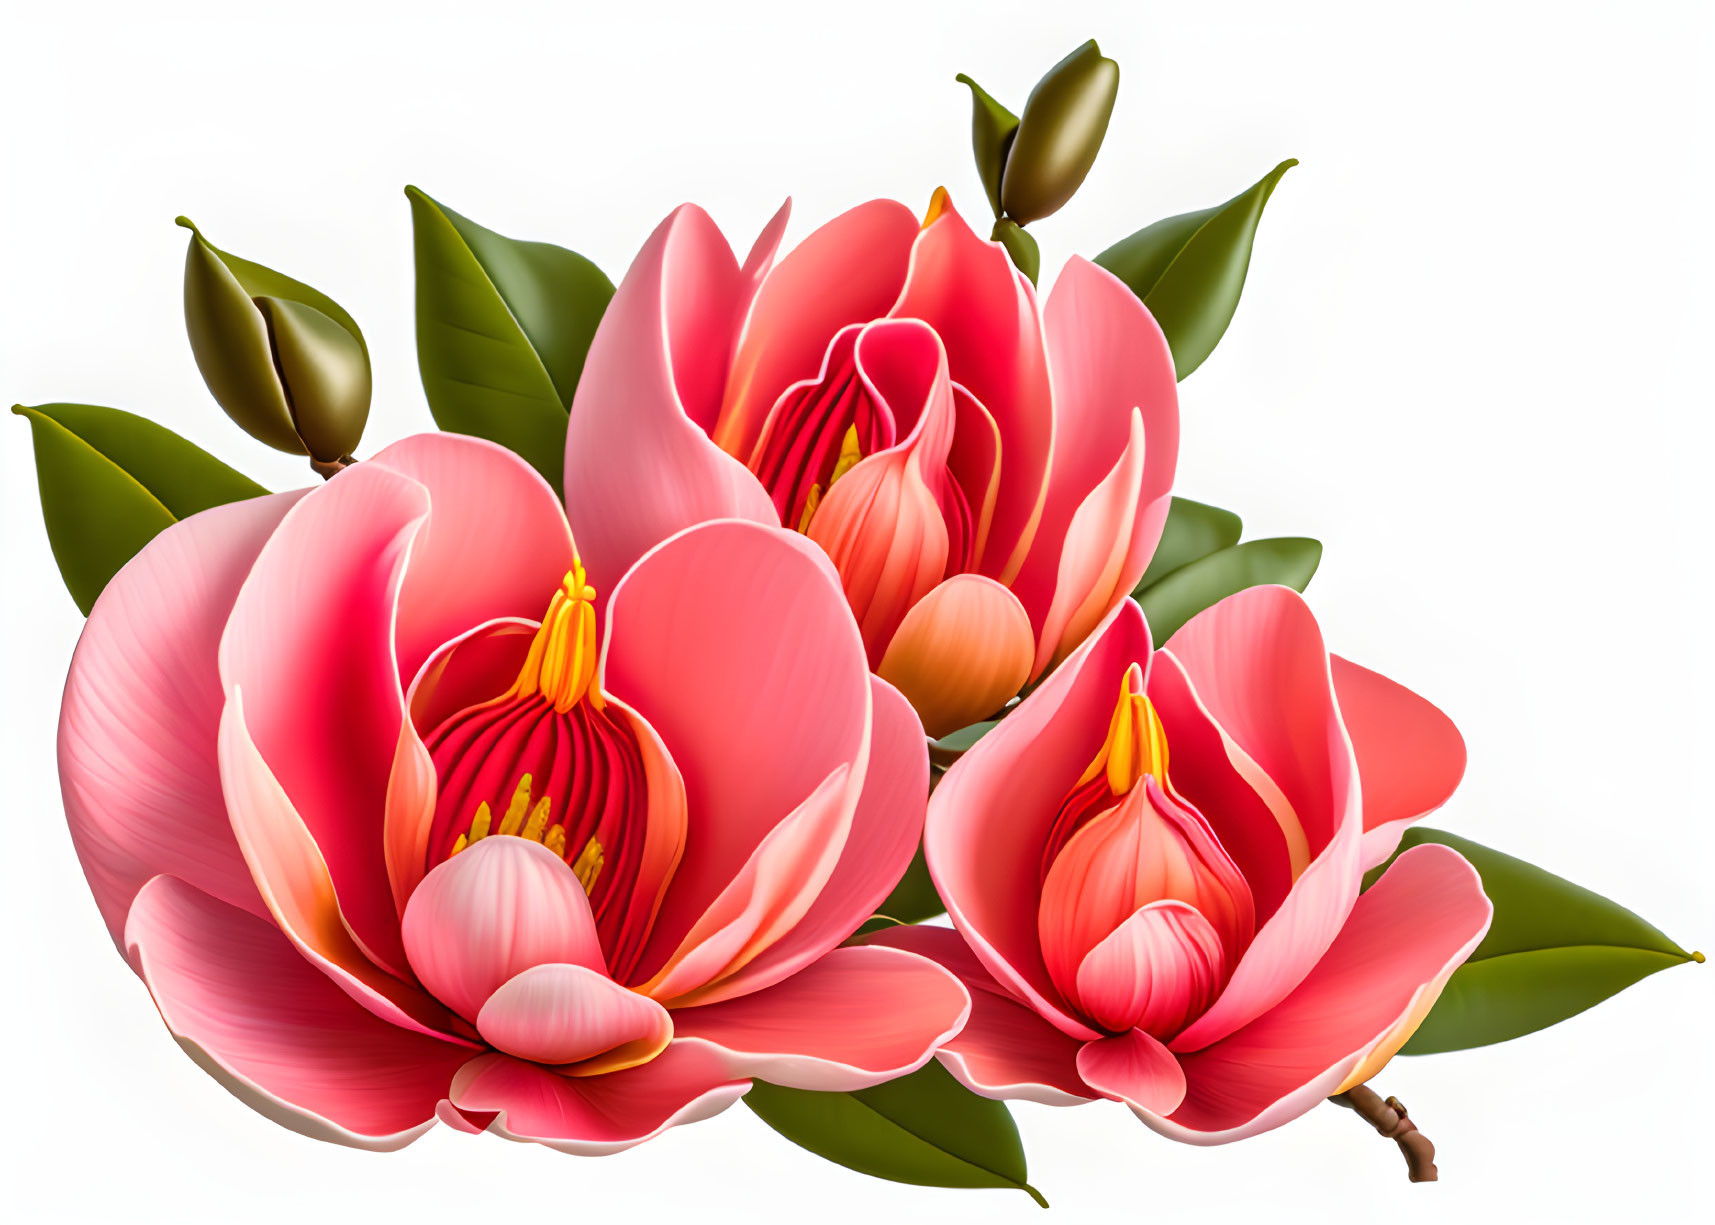 Pink magnolia flowers with green leaves on white background.